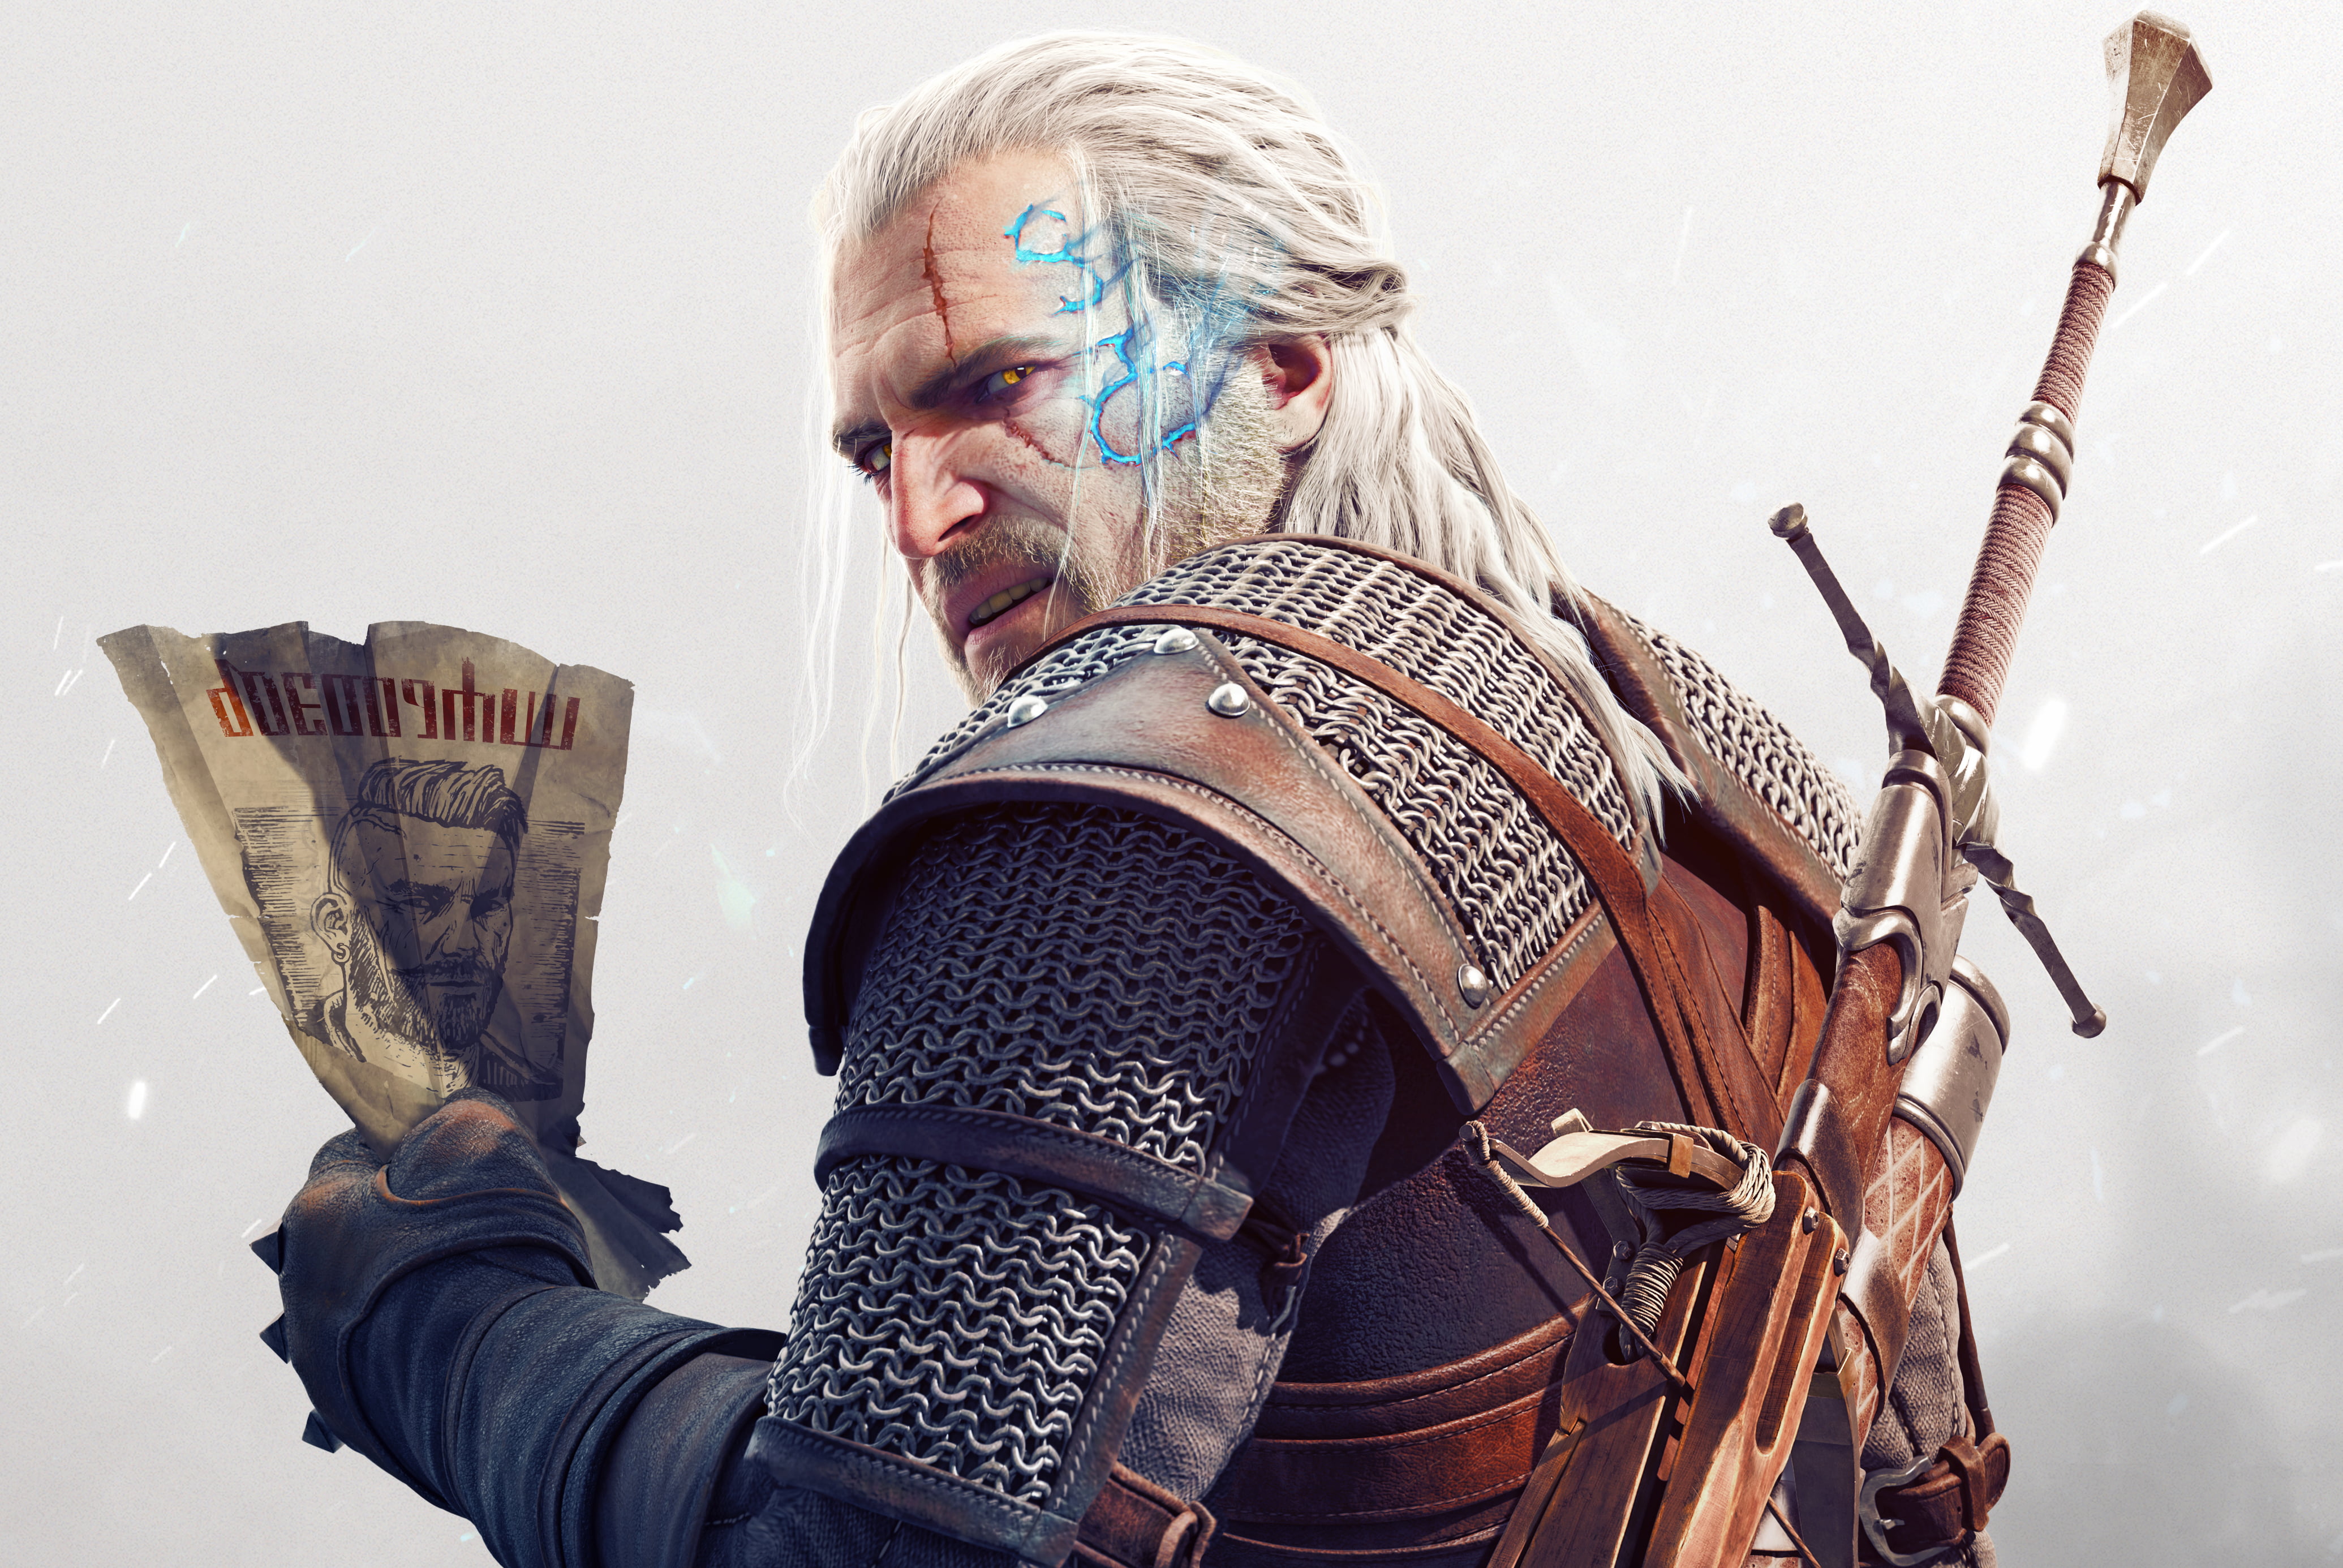 General 4141x2771 The Witcher The Witcher 3: Wild Hunt The Witcher 3: Wild Hunt – Hearts of Stone video games CD Projekt RED Geralt of Rivia video game men Wanted posters video game characters Video Game Heroes white background simple background sword PC gaming RPG